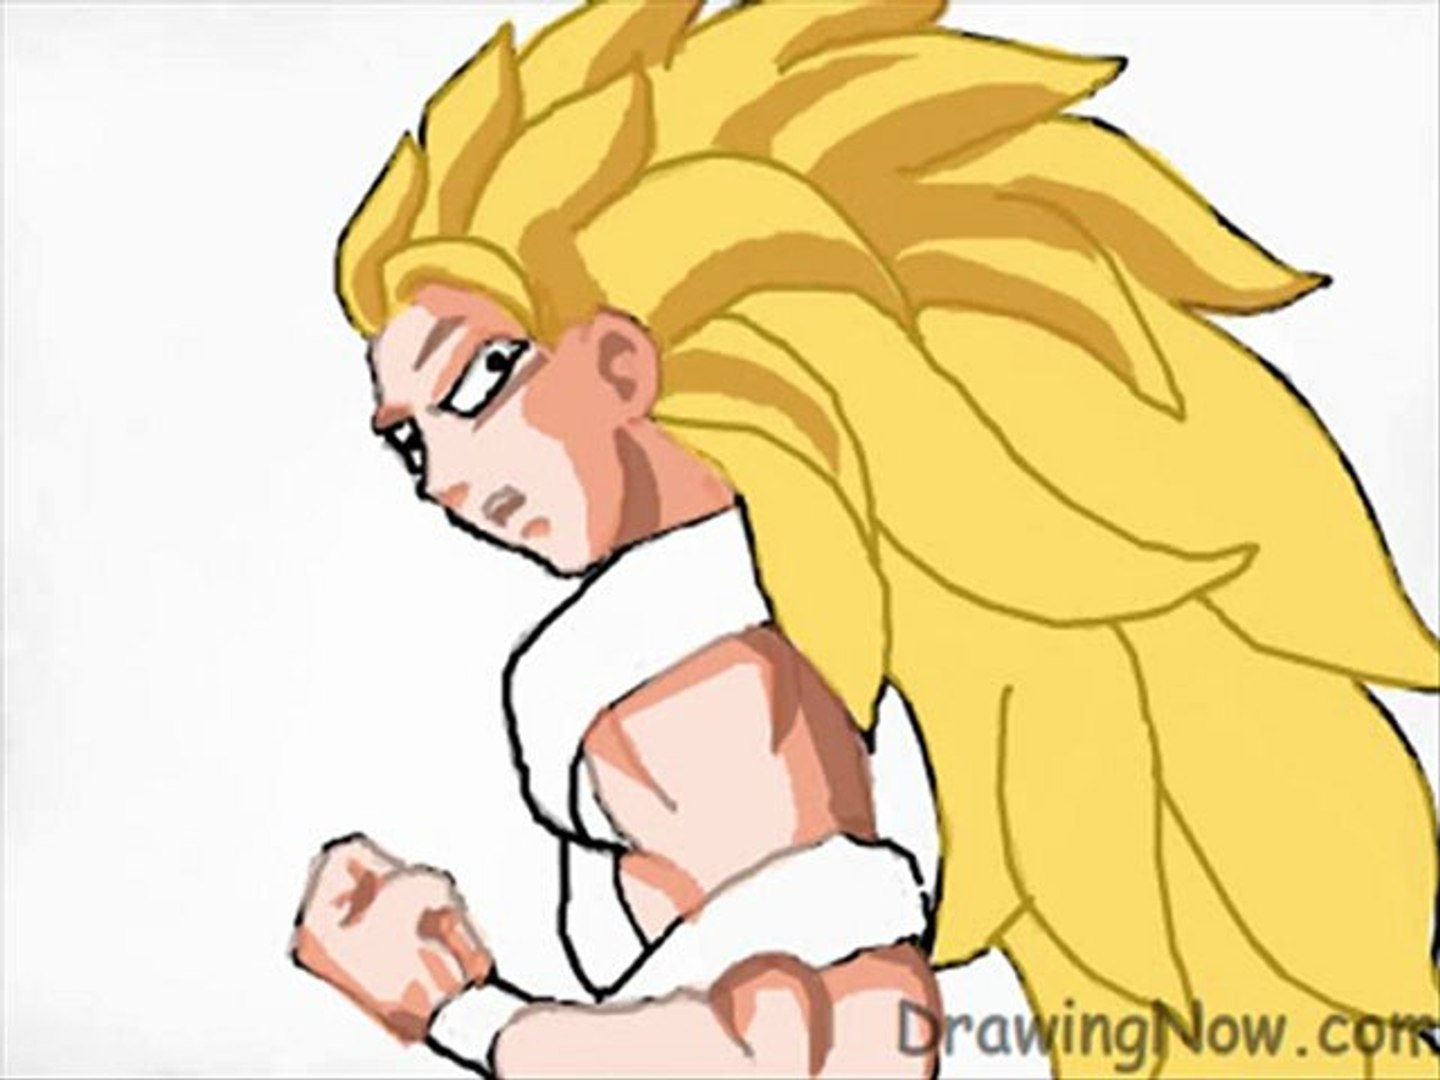 How to Draw Goku from Dragon Ball - Step by Step Video - video Dailymotion